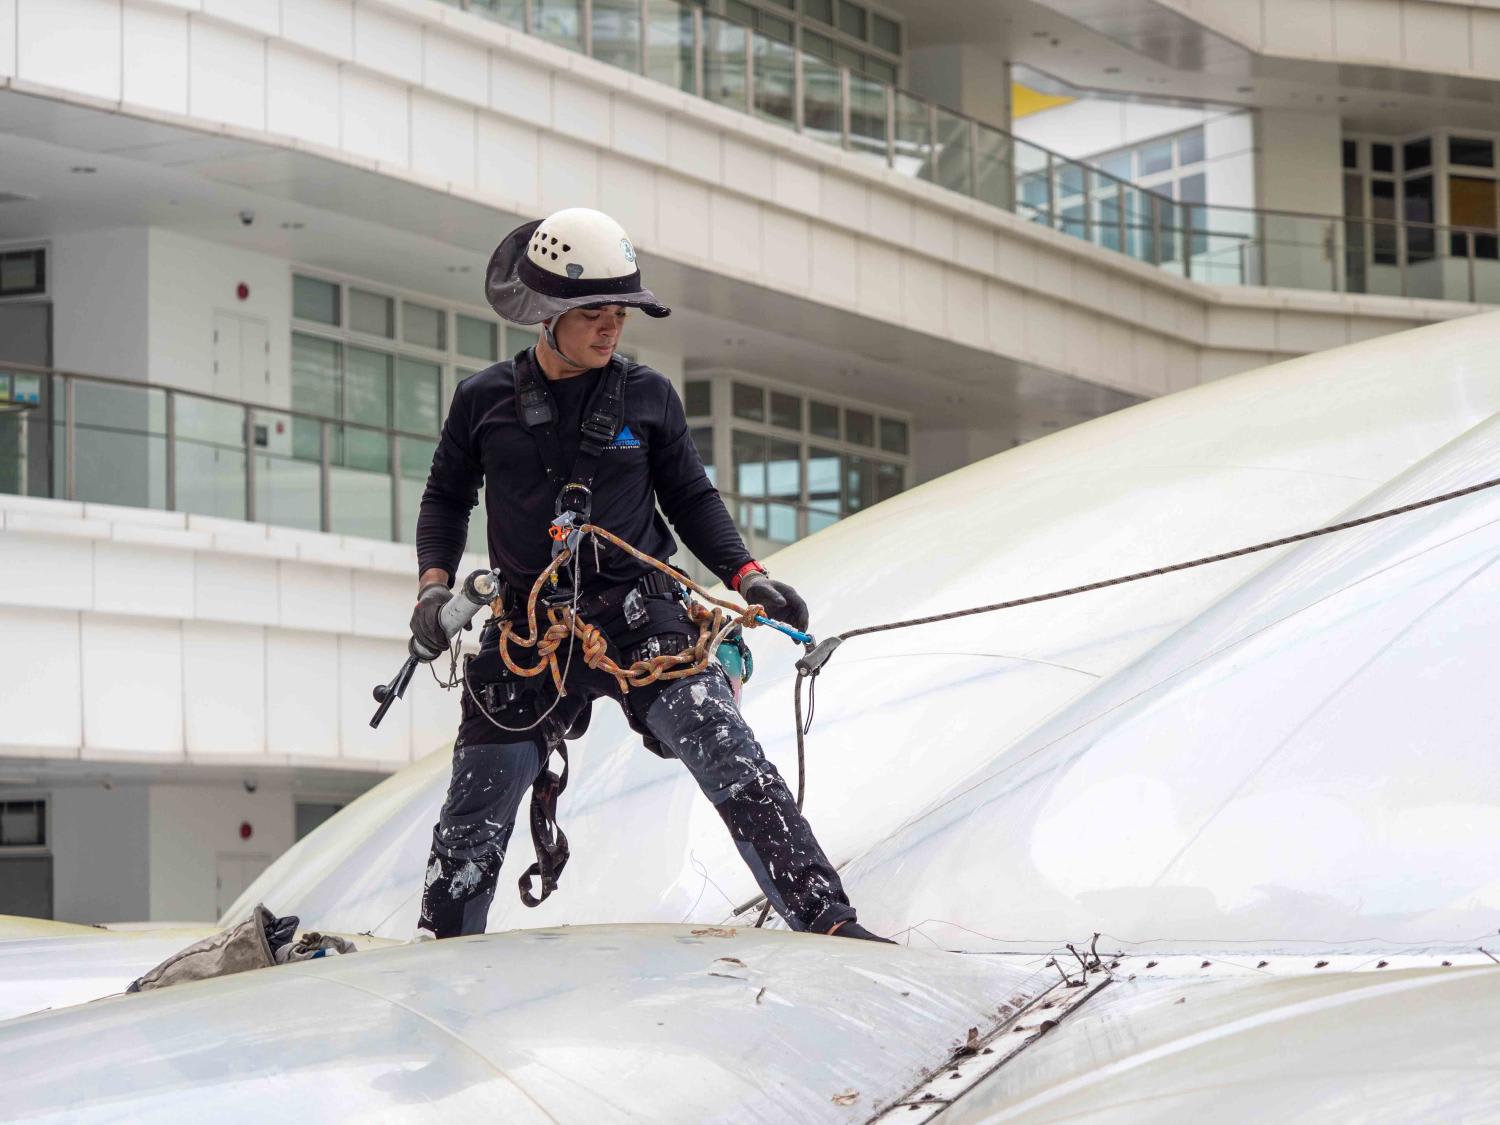 Rope access technician Muhammad Safiuddin Abdul Rahman, 29, has been in the job for a year. The work involves various tasks including maintenance work, inspections and cleaning while his workplaces range from deep waters to the top of buildings.